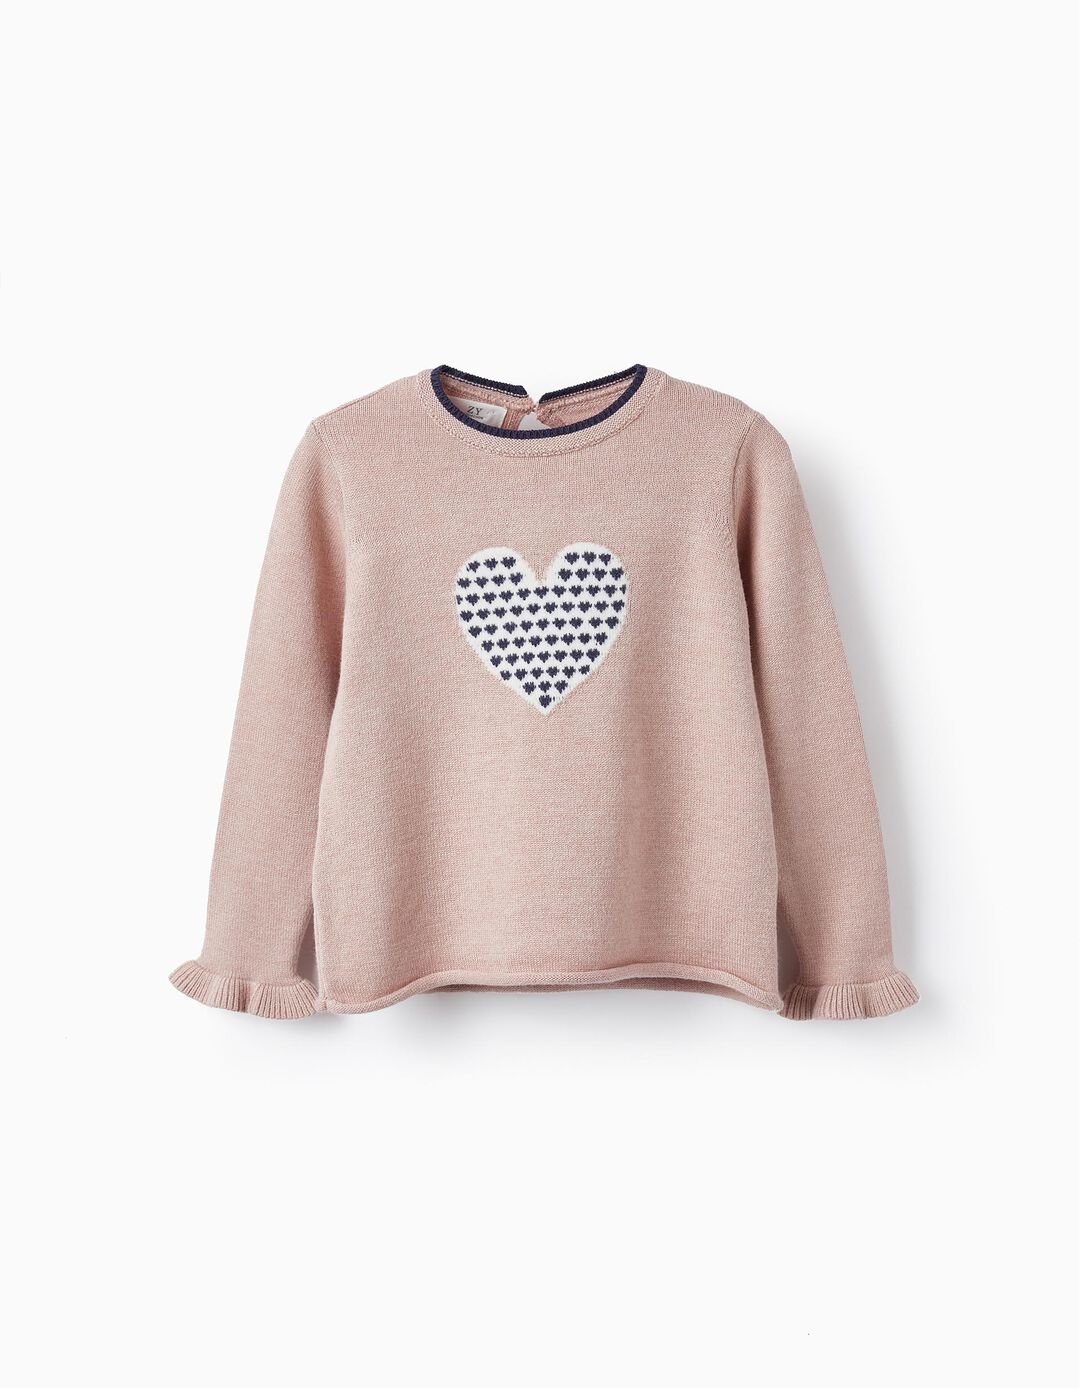 Knitted Jumper for Girls 'Heart', Pink